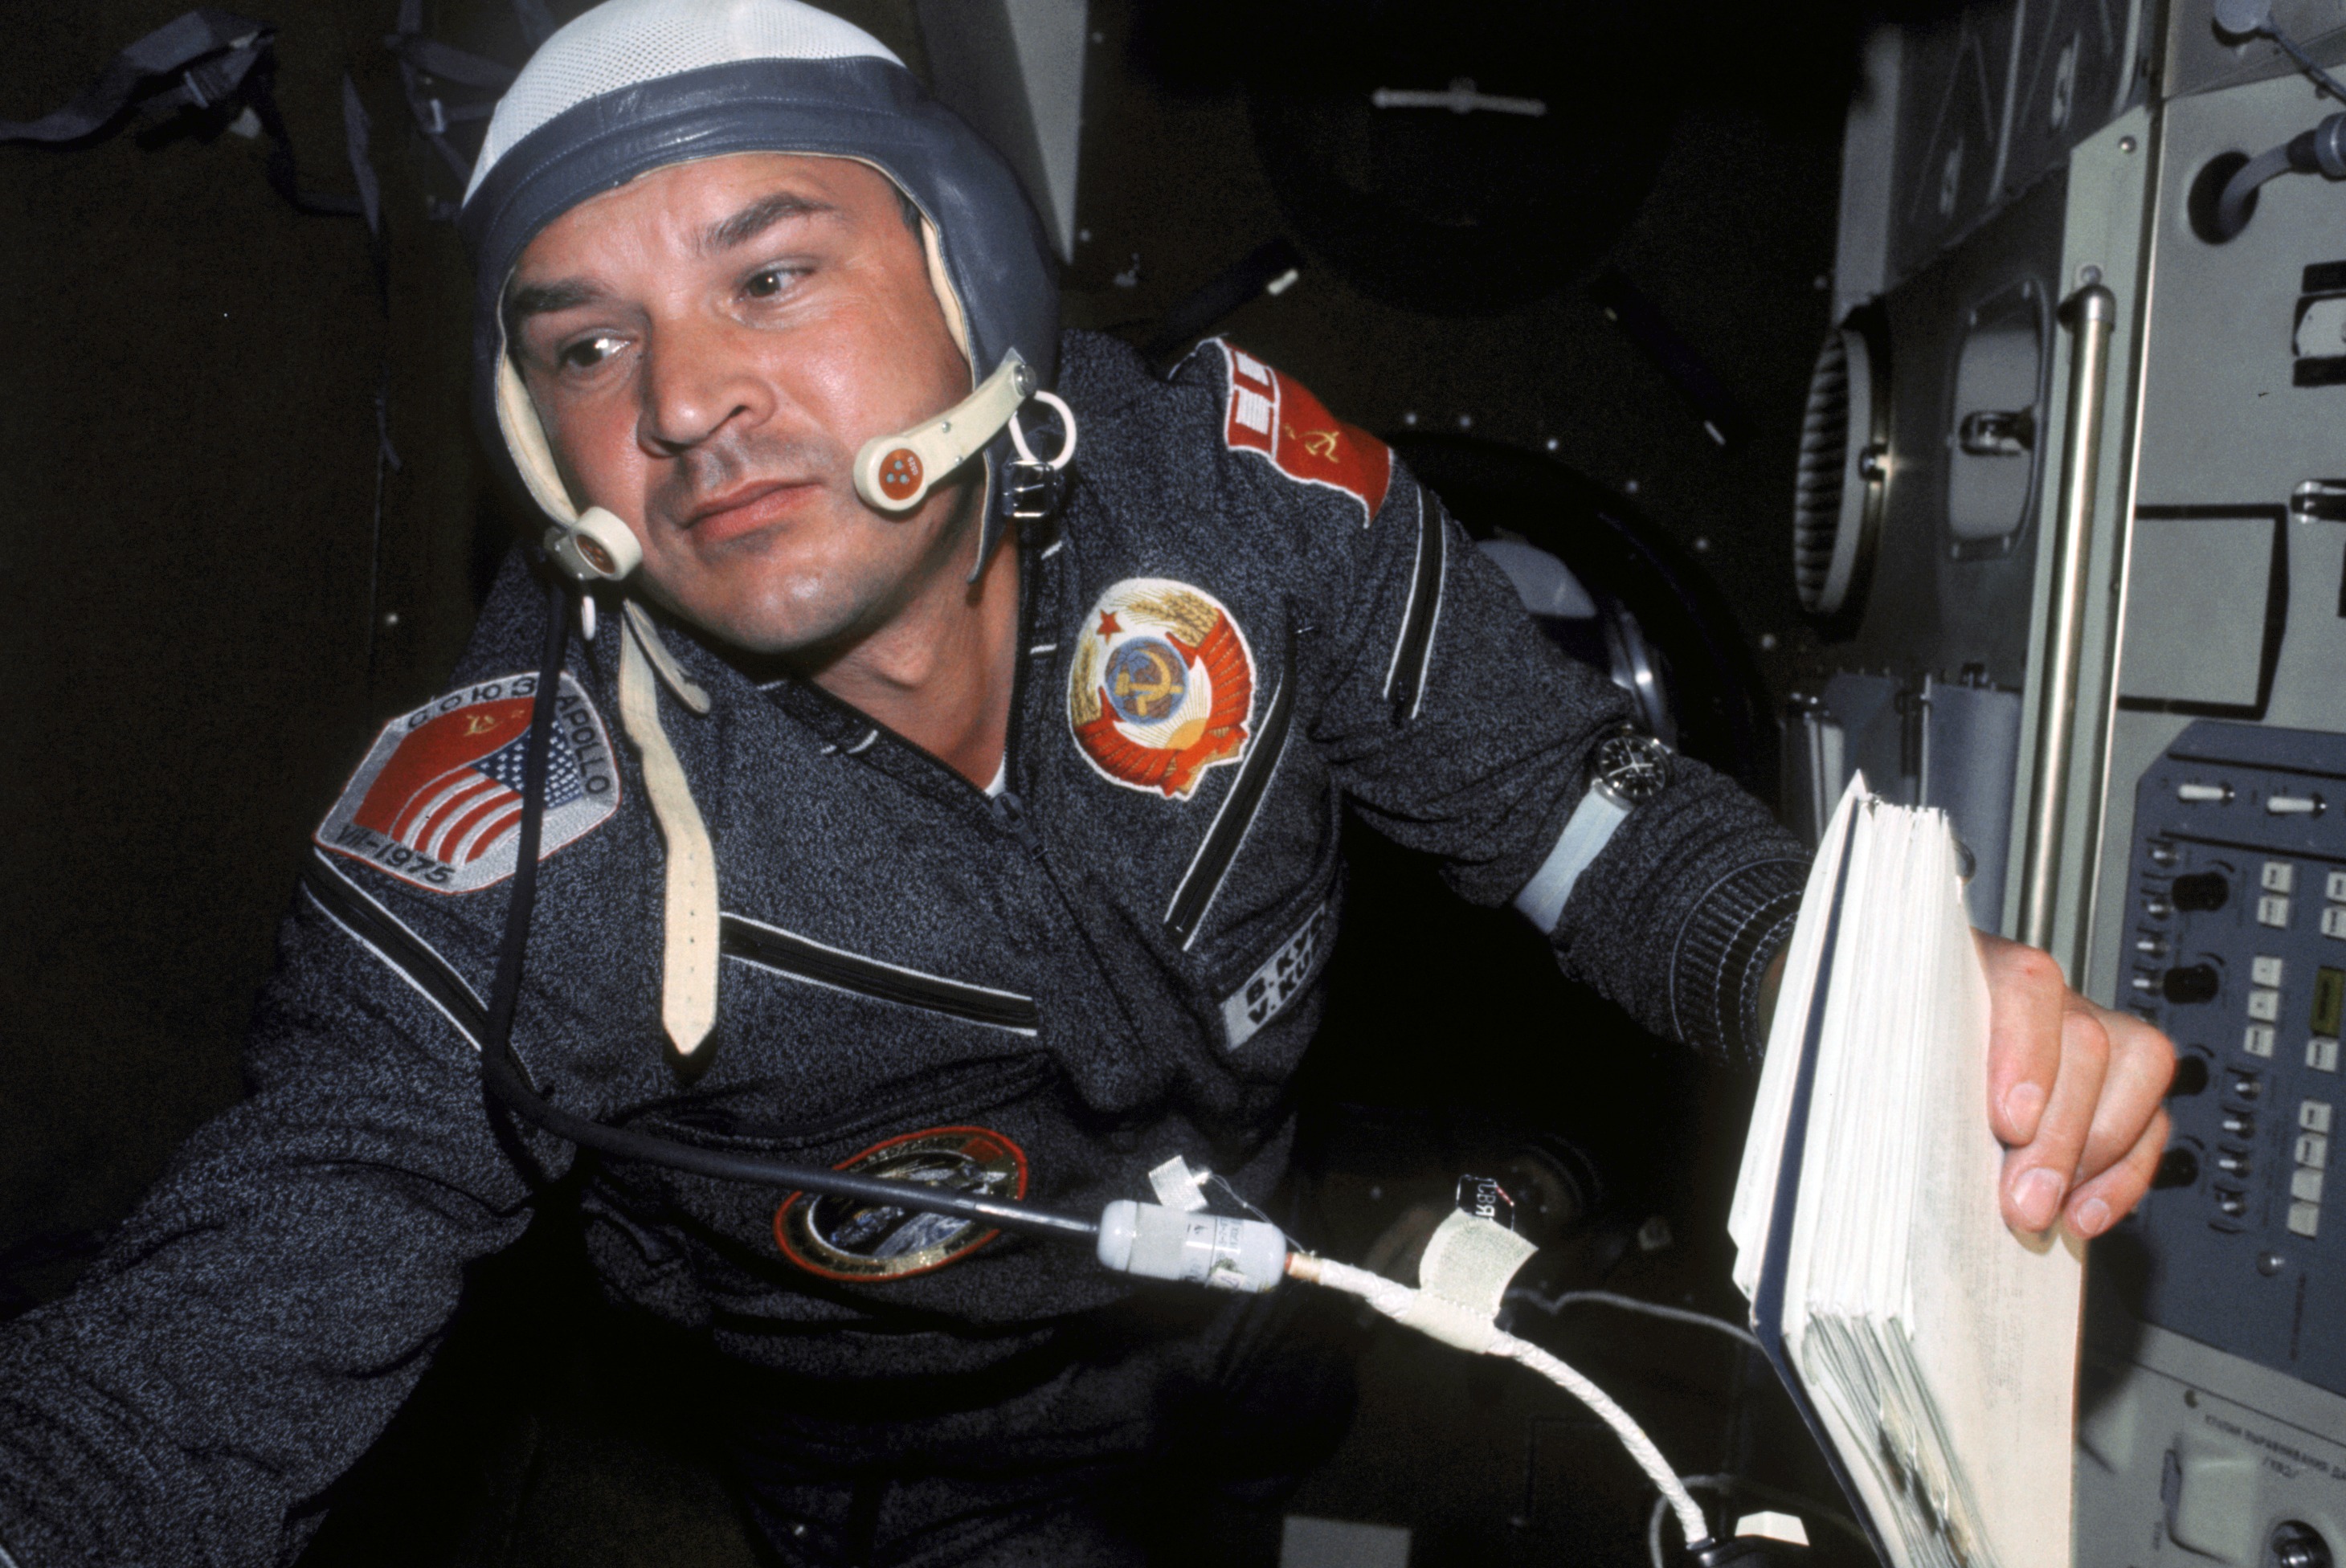 Pictured during the joint U.S.-Soviet Apollo-Soyuz Test Project (ASTP) mission in July 1975, Valeri Kubasov enjoyed a career highlighted by three space missions. Photo Credit: NASA